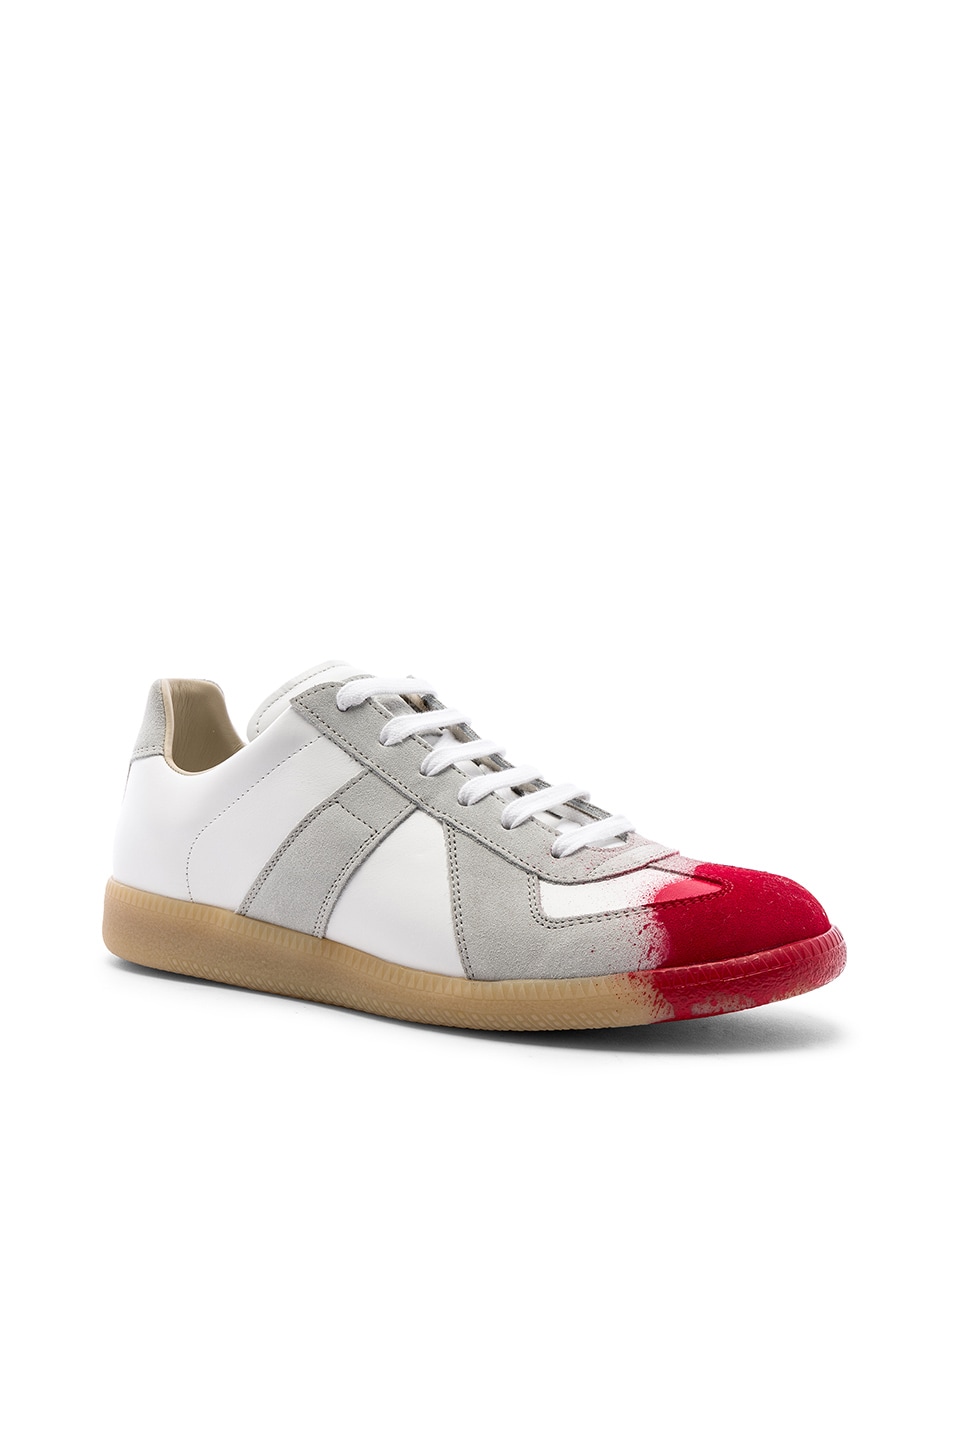 Image 1 of Maison Margiela Replica Low Top Sneakers in White & Red